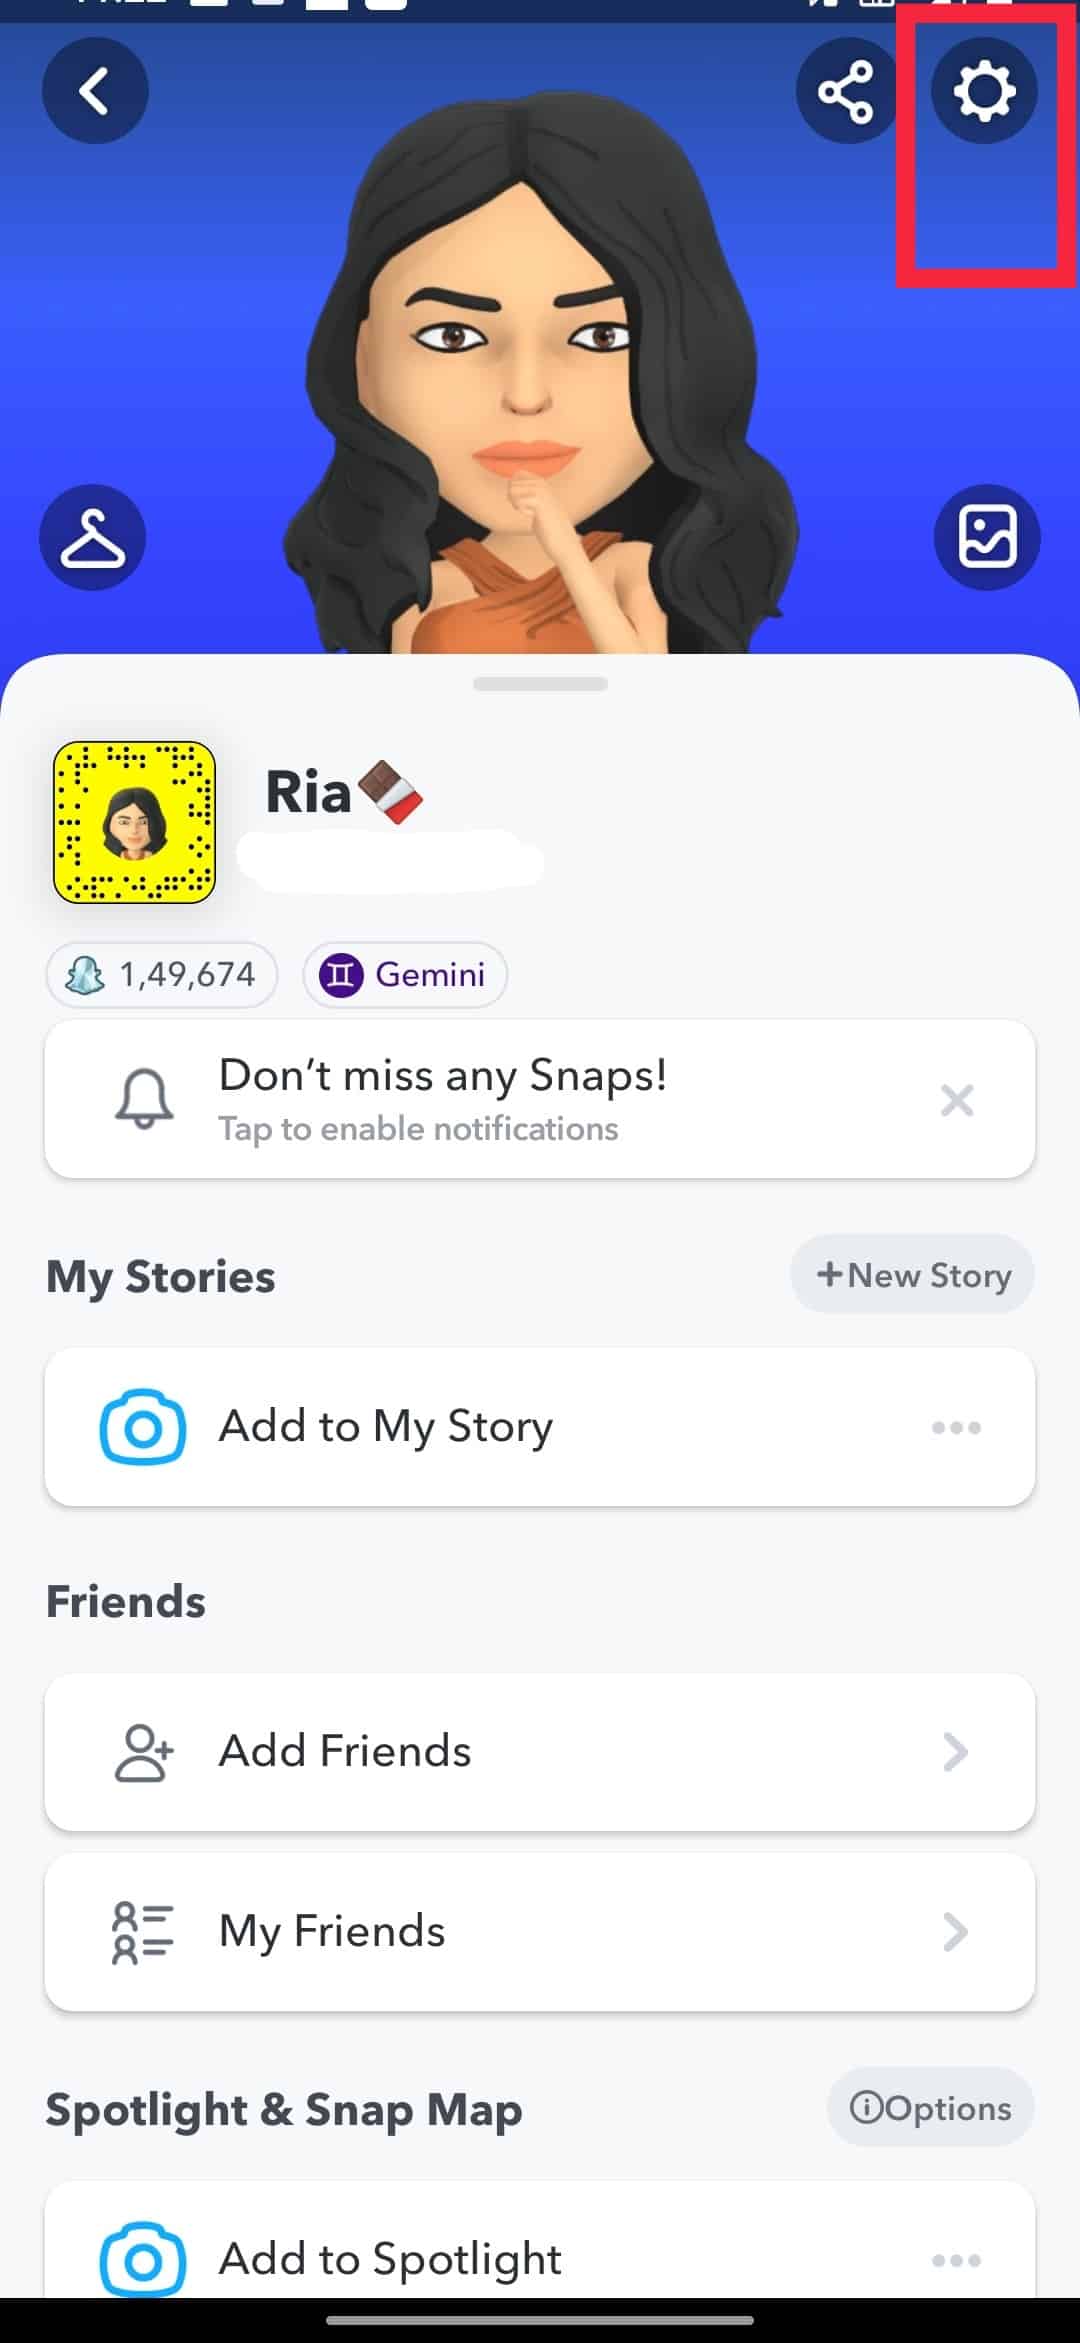 First login to your Snapchat account and open the my data page through your settings.